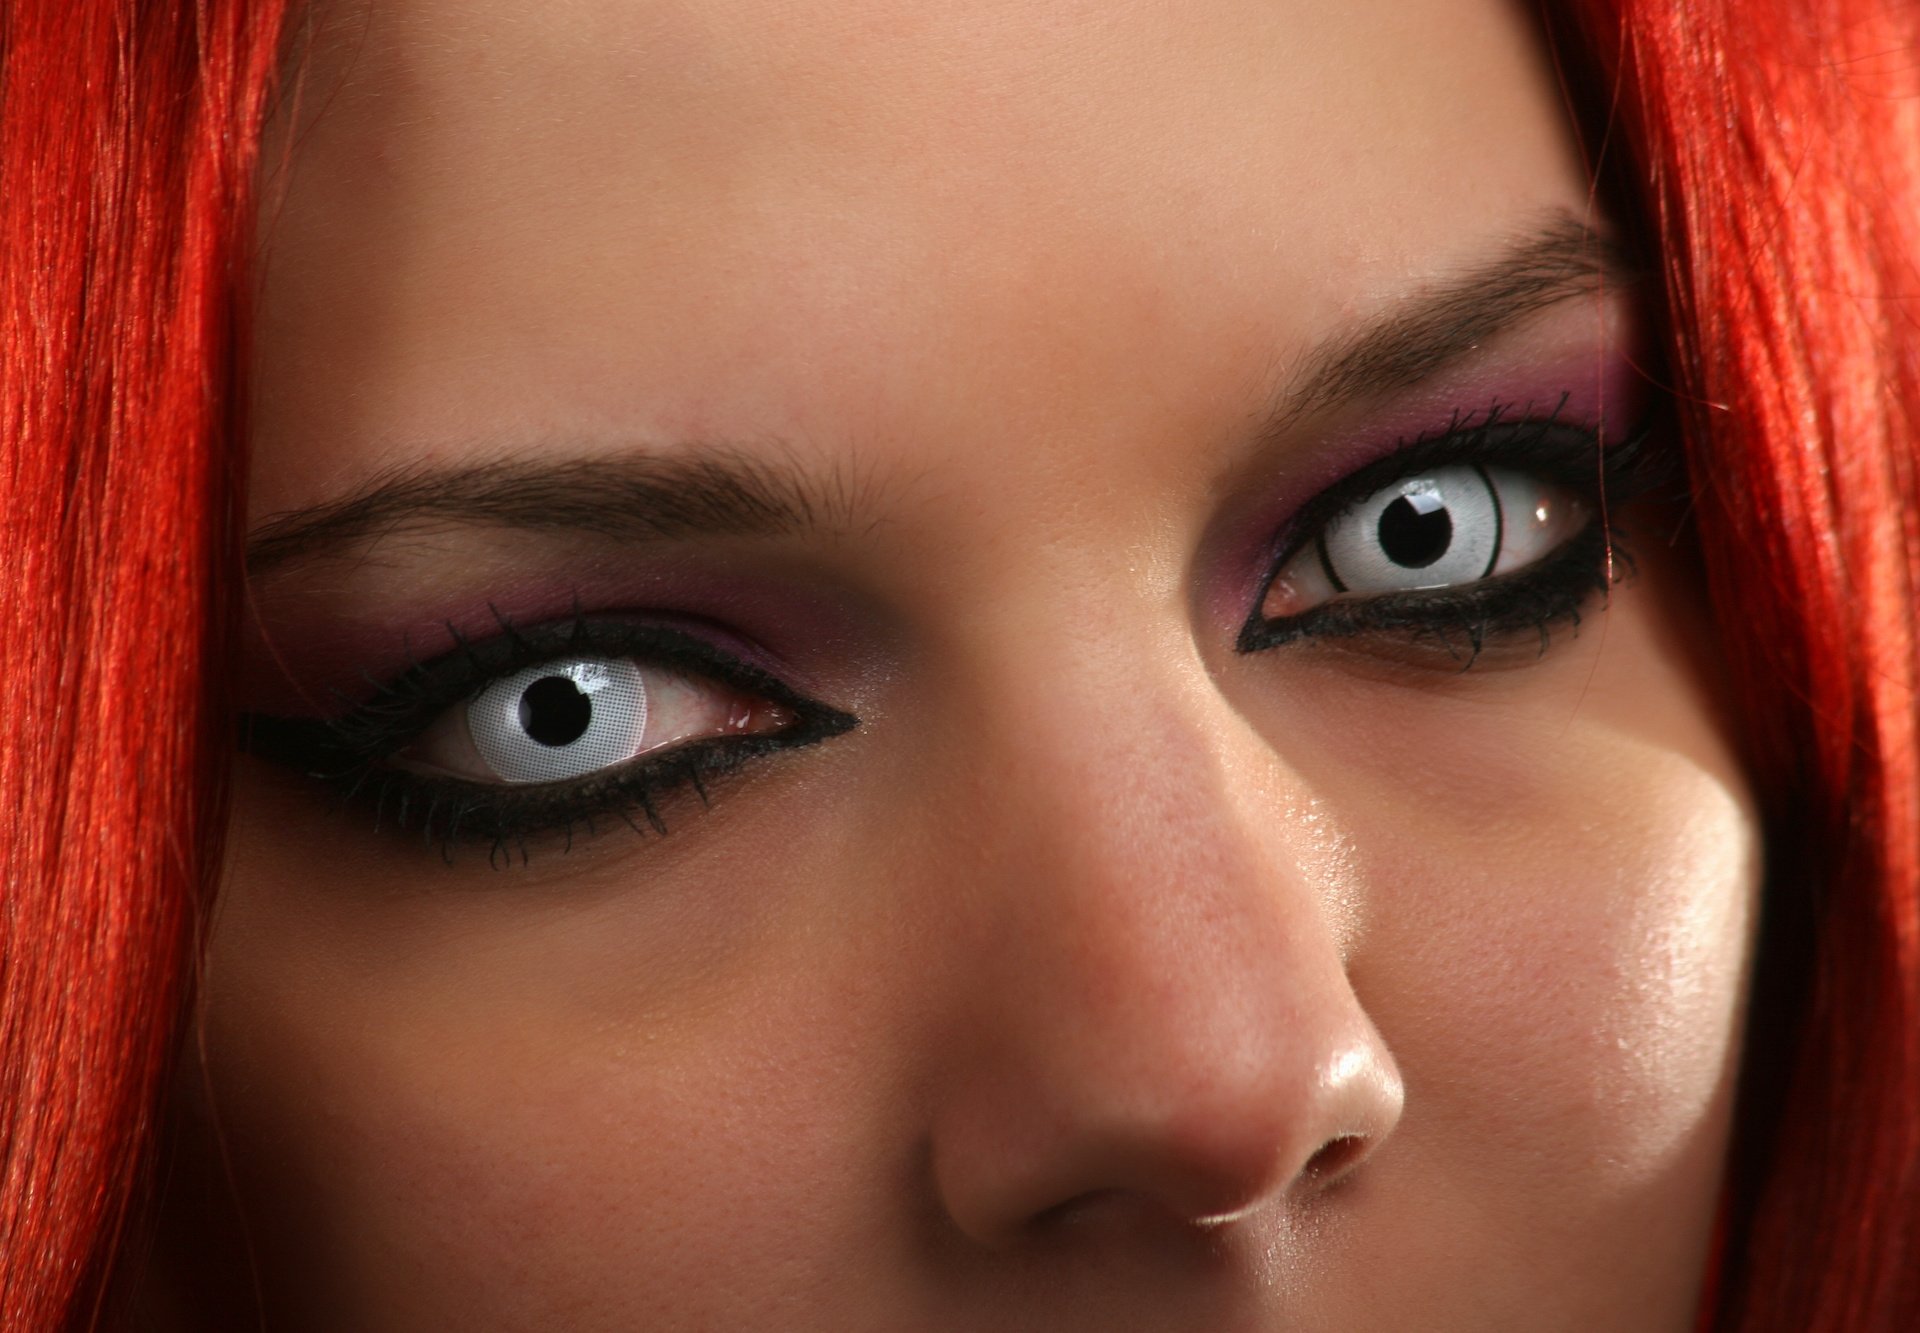 The Spooky Risks of Non-Prescription Colored Contacts for Halloween